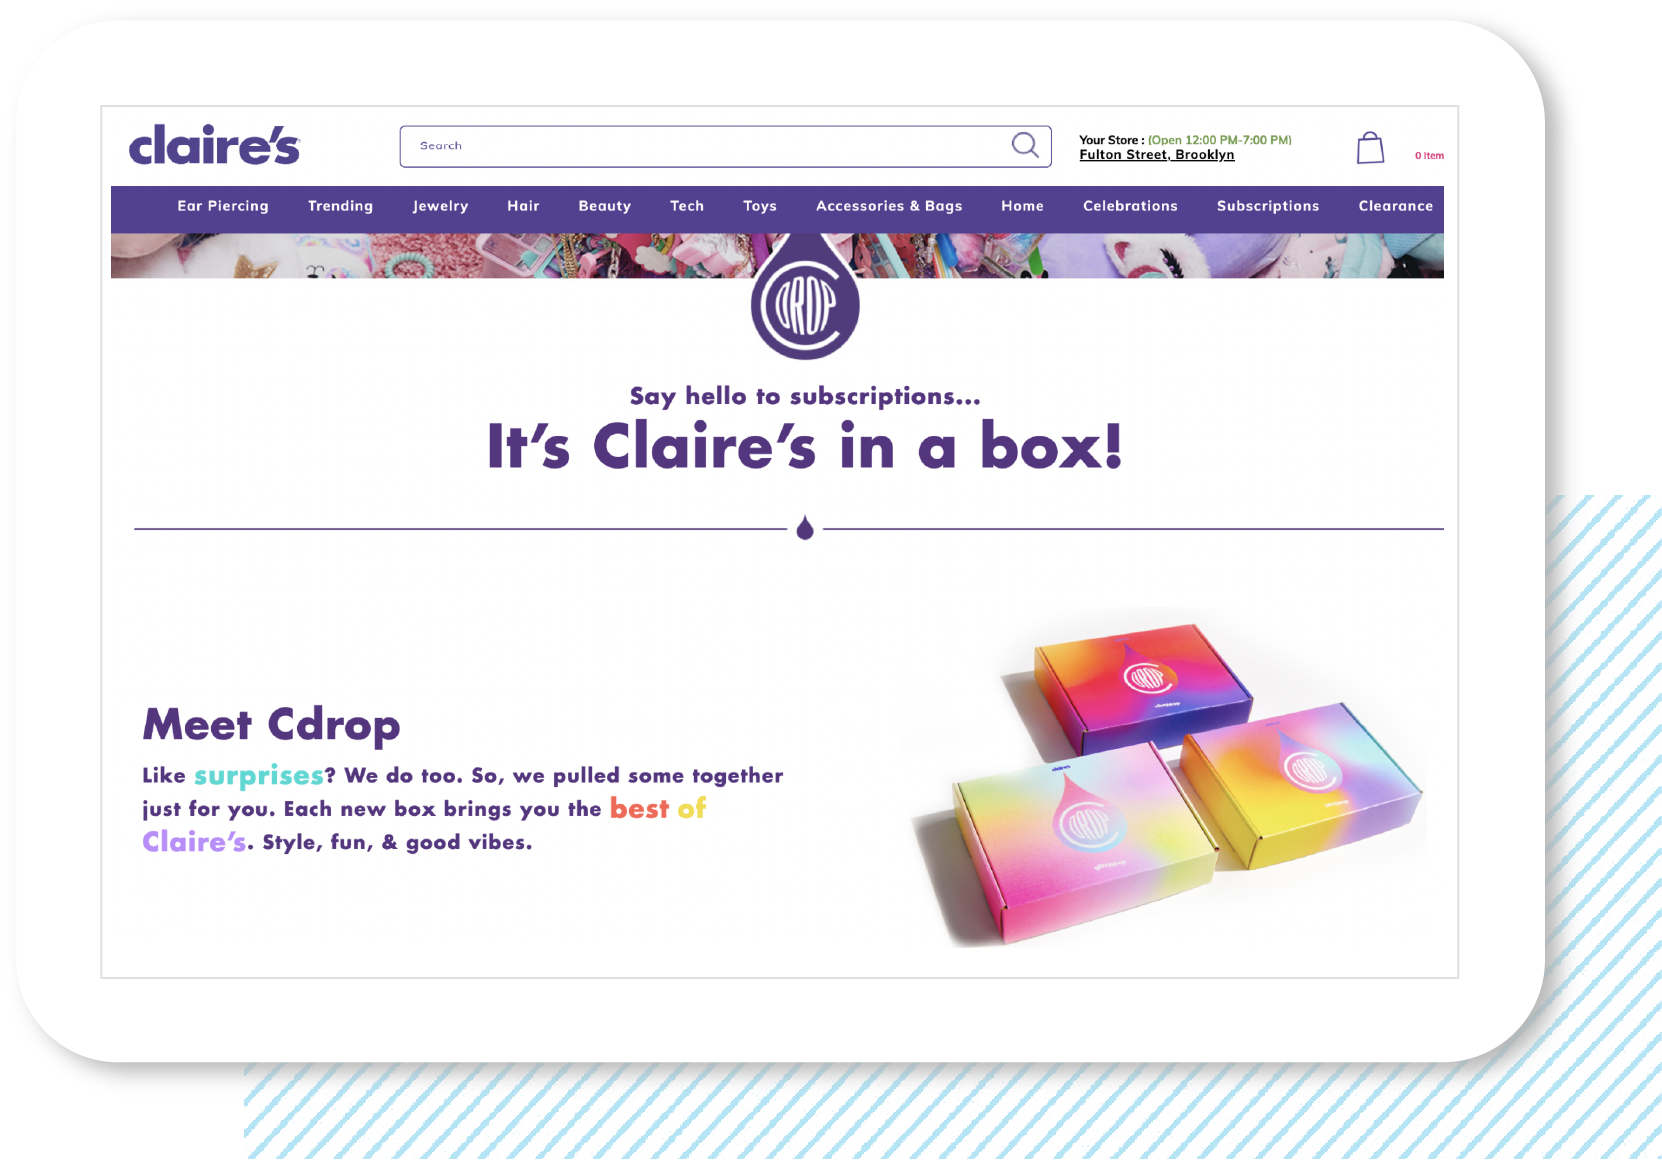 Claire's Cdrop is an example of curated subscription program.